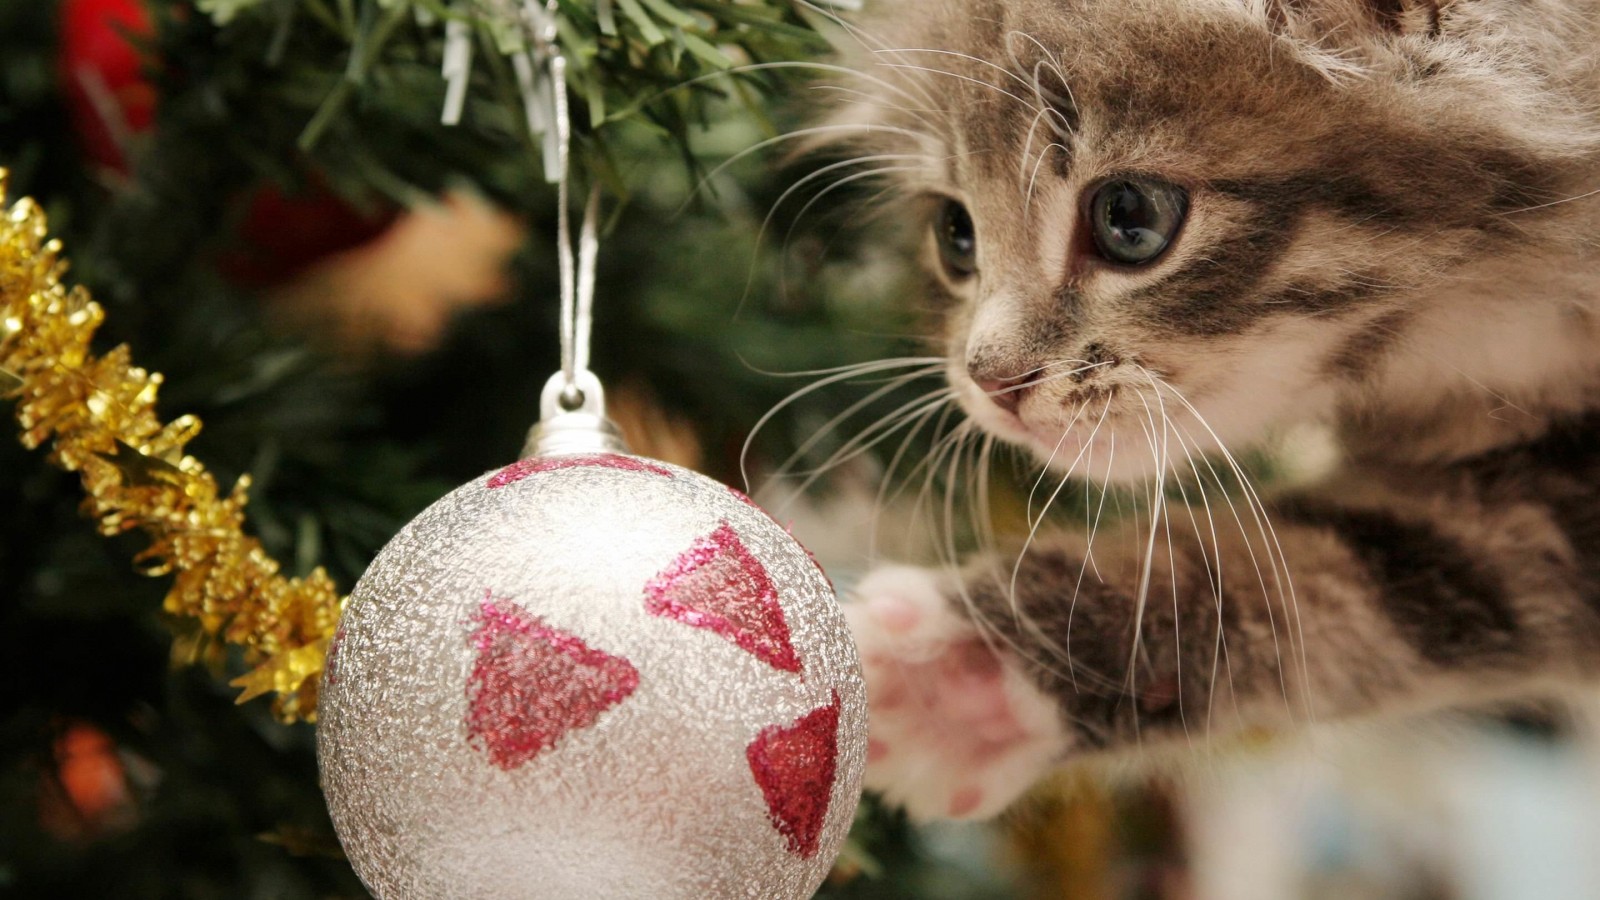 Kitten Playing With Christmas Ornaments Wallpaper for Desktop 1600x900